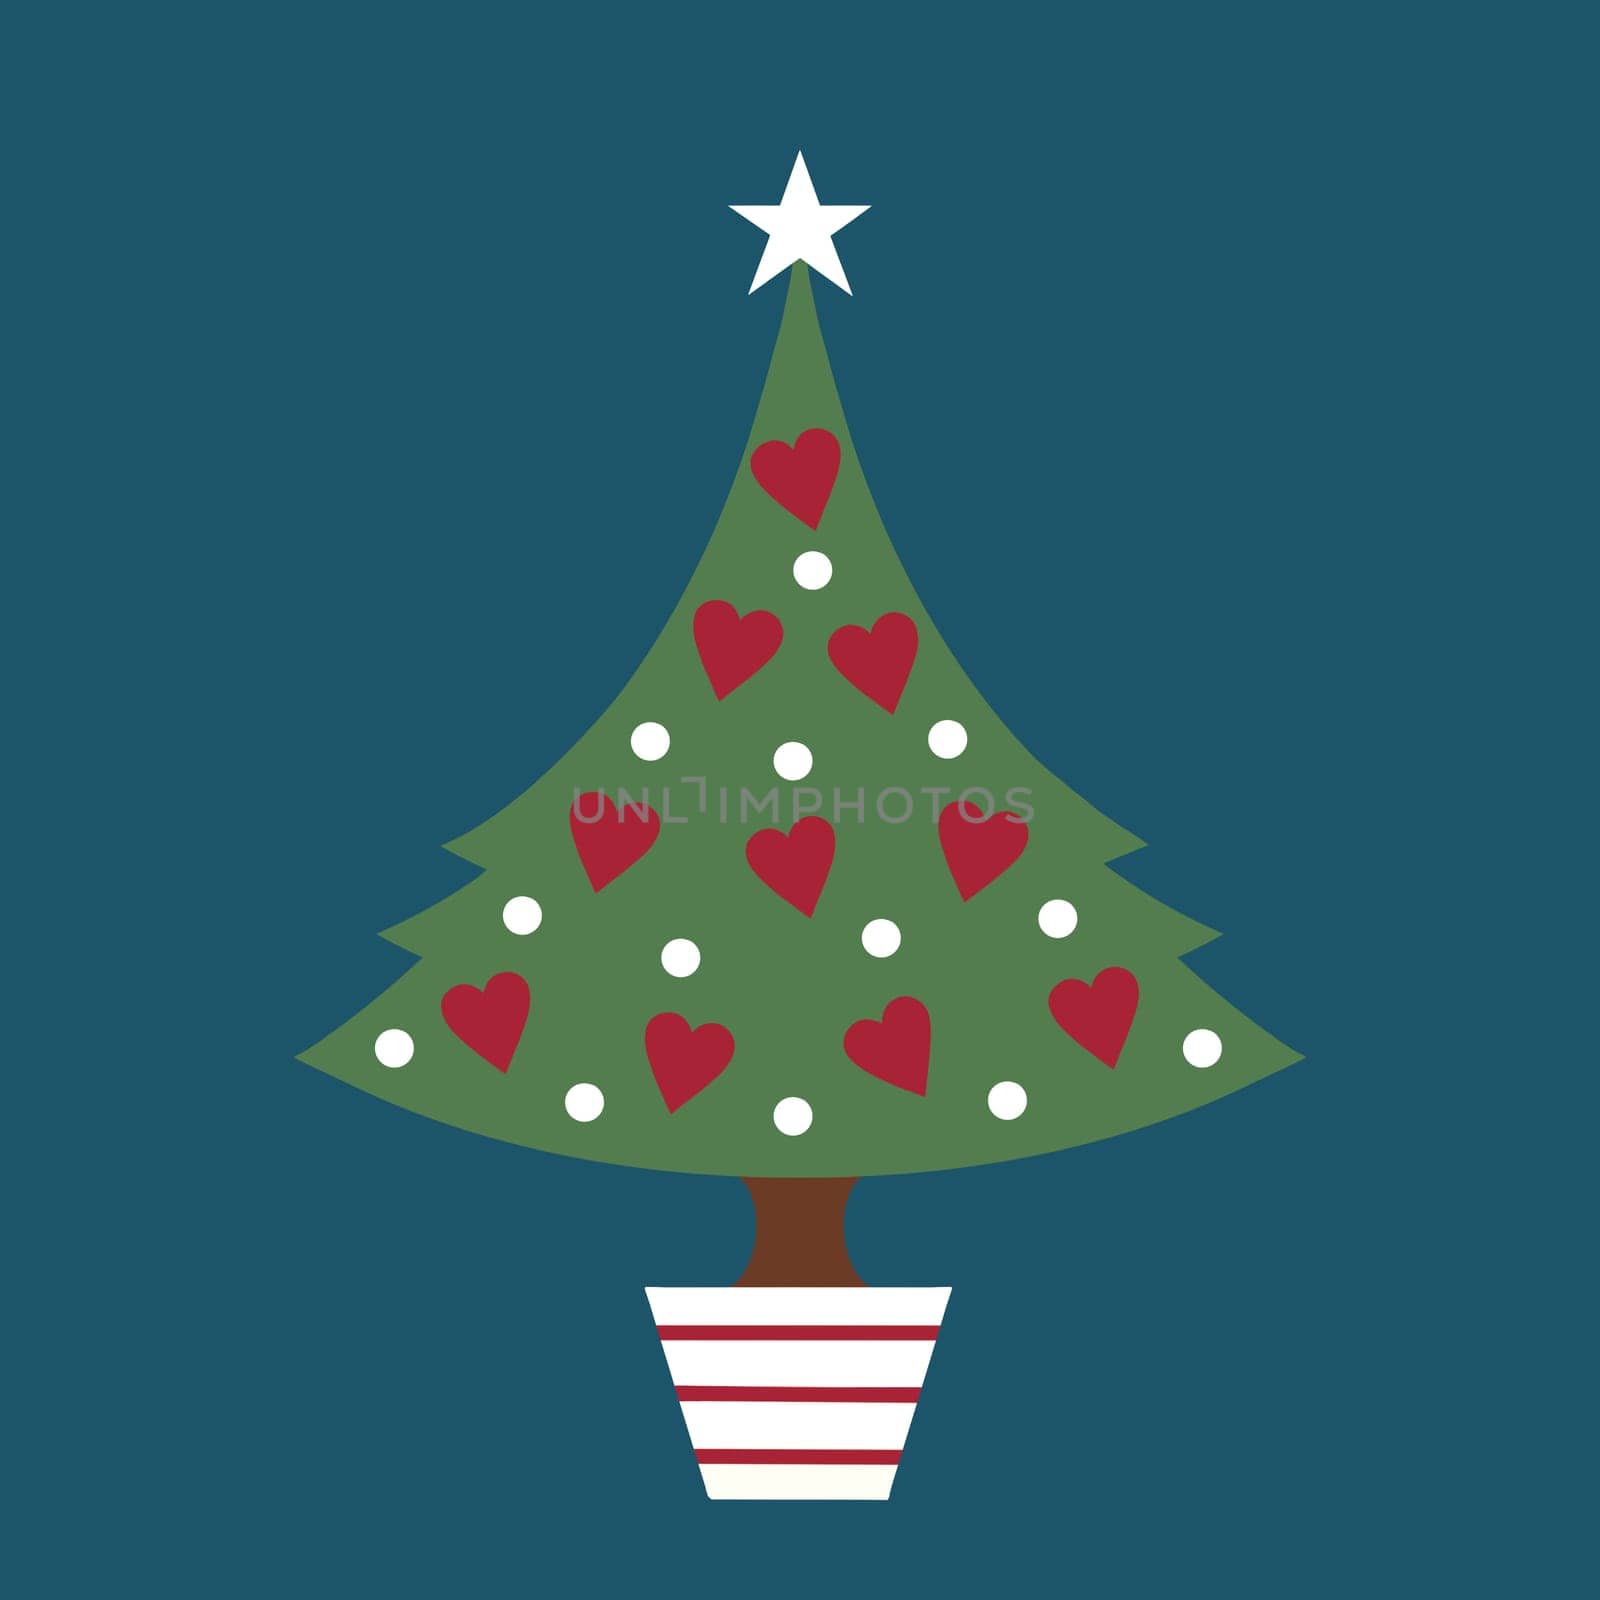 Modern Christmas tree design with simple heart and polka dot decorations and a star on top. The tree is in a festive red and white striped pot like a candy cane and placed on a bold teal background.